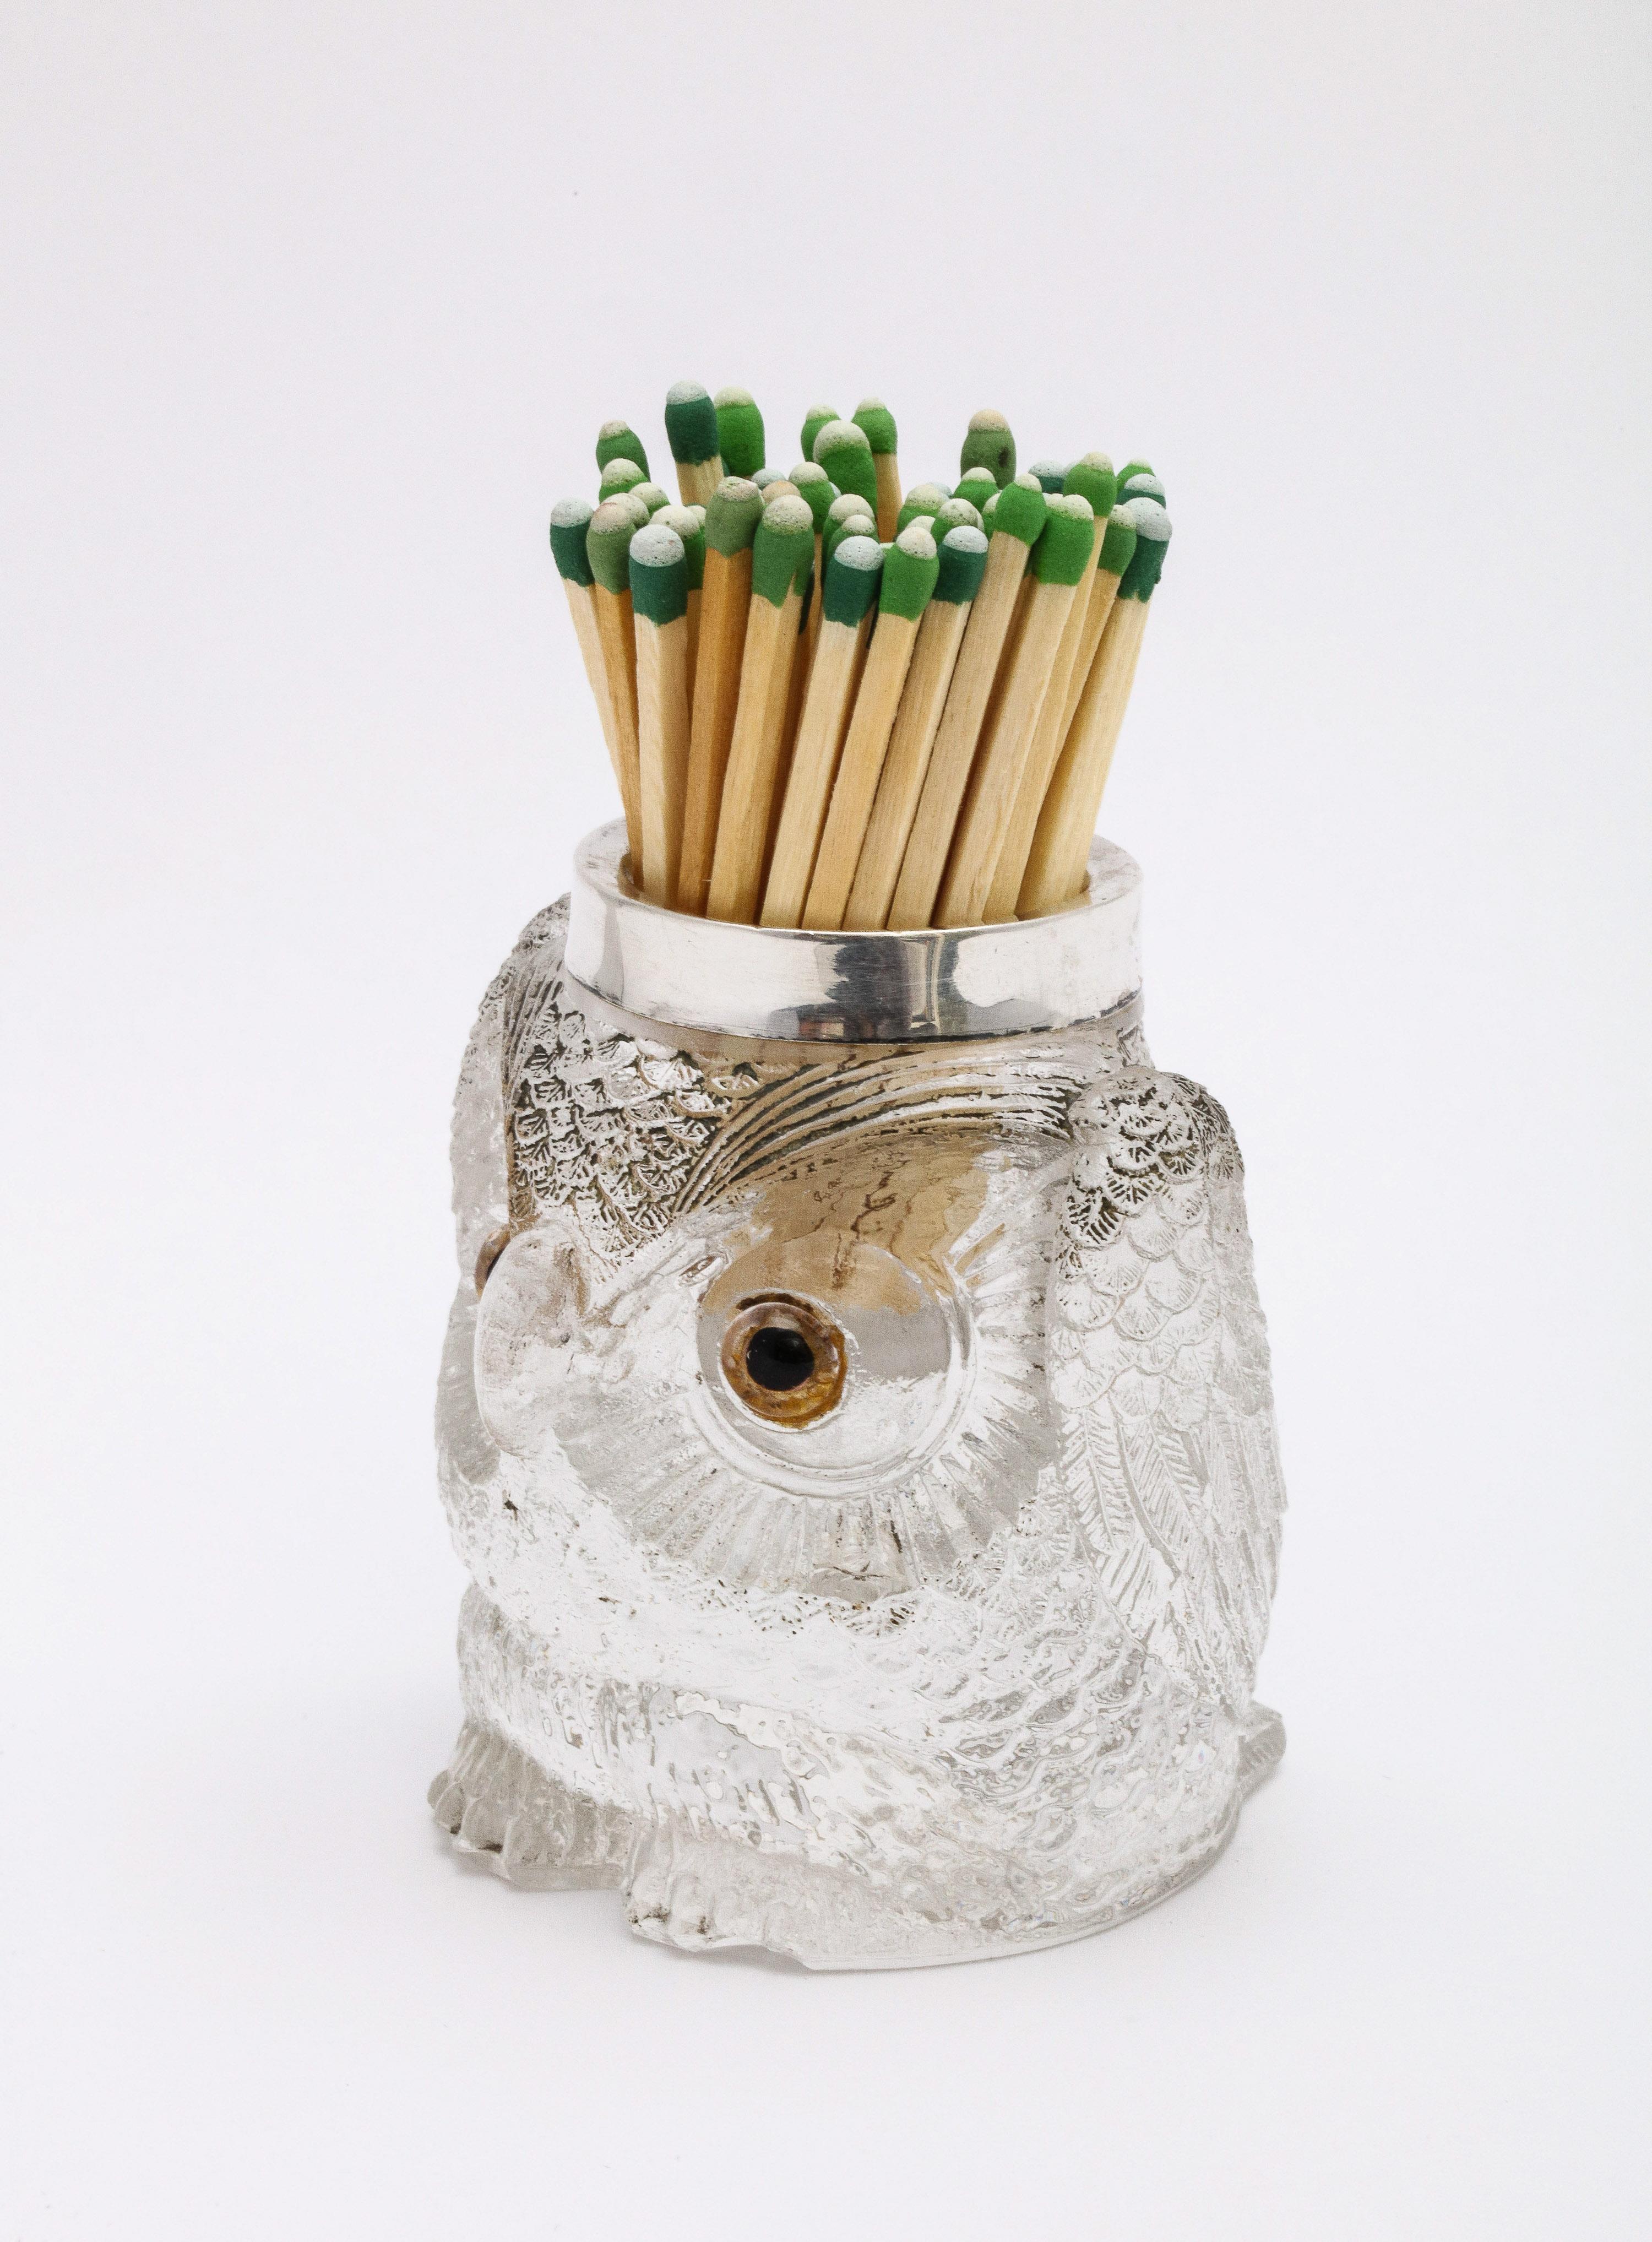 Rare Art Deco Period Sterling Silver-Mounted Glass Owl-Form Match Striker In Good Condition For Sale In New York, NY